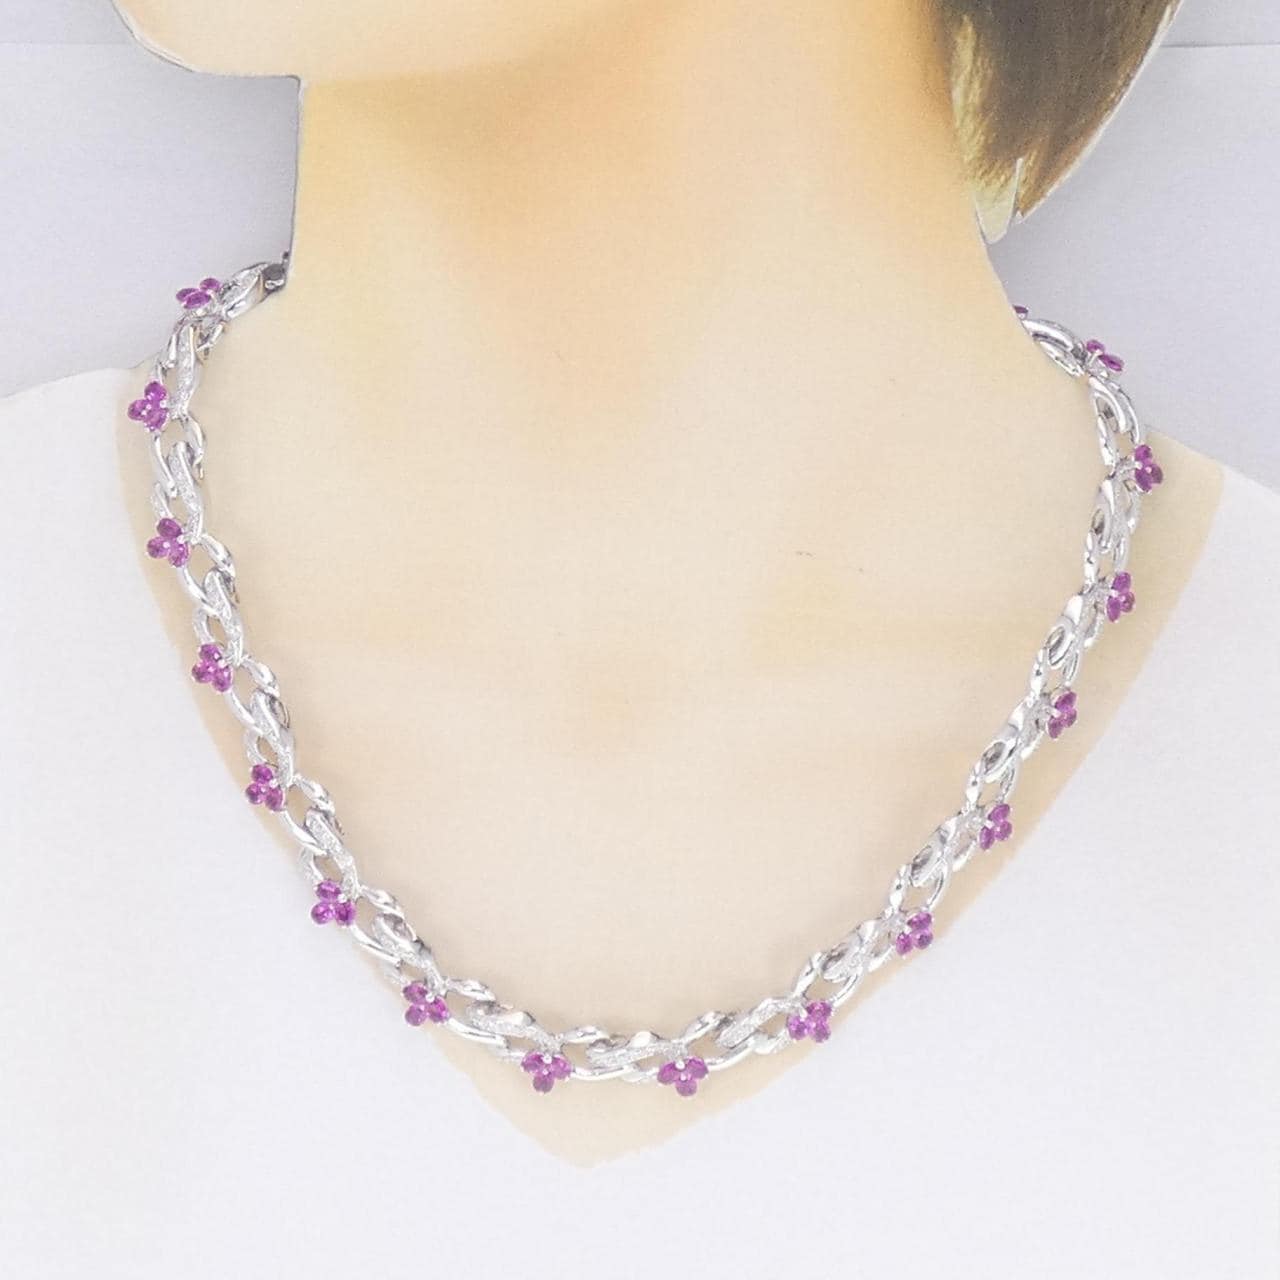 Junet Flower Ruby Necklace 15.85CT